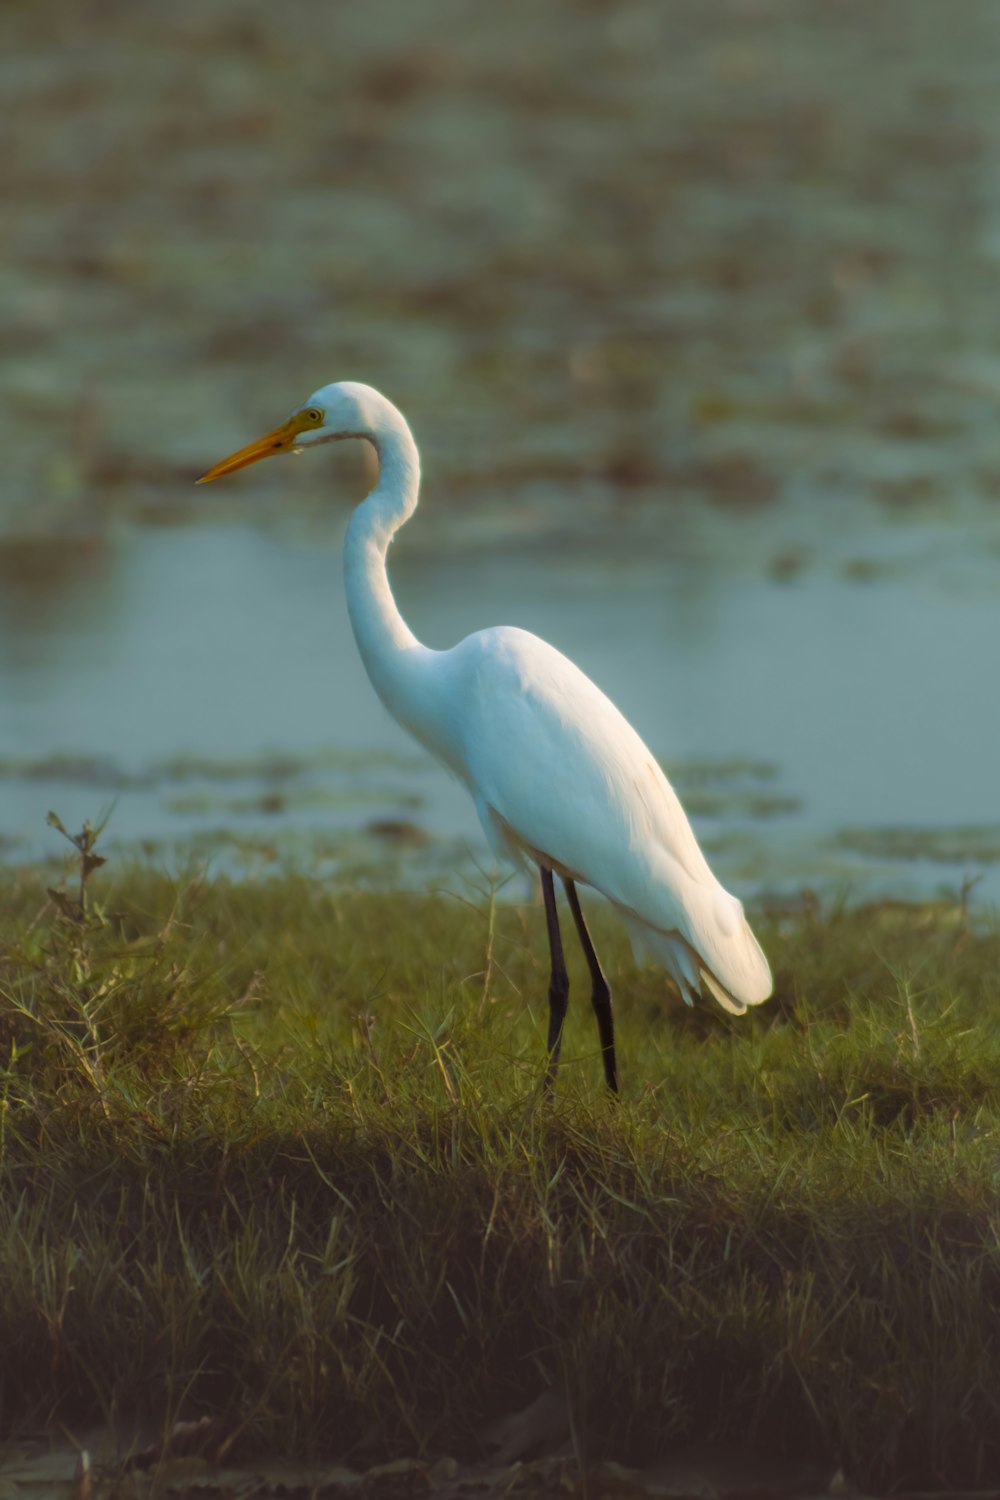 a white bird standing in the grass near a body of water